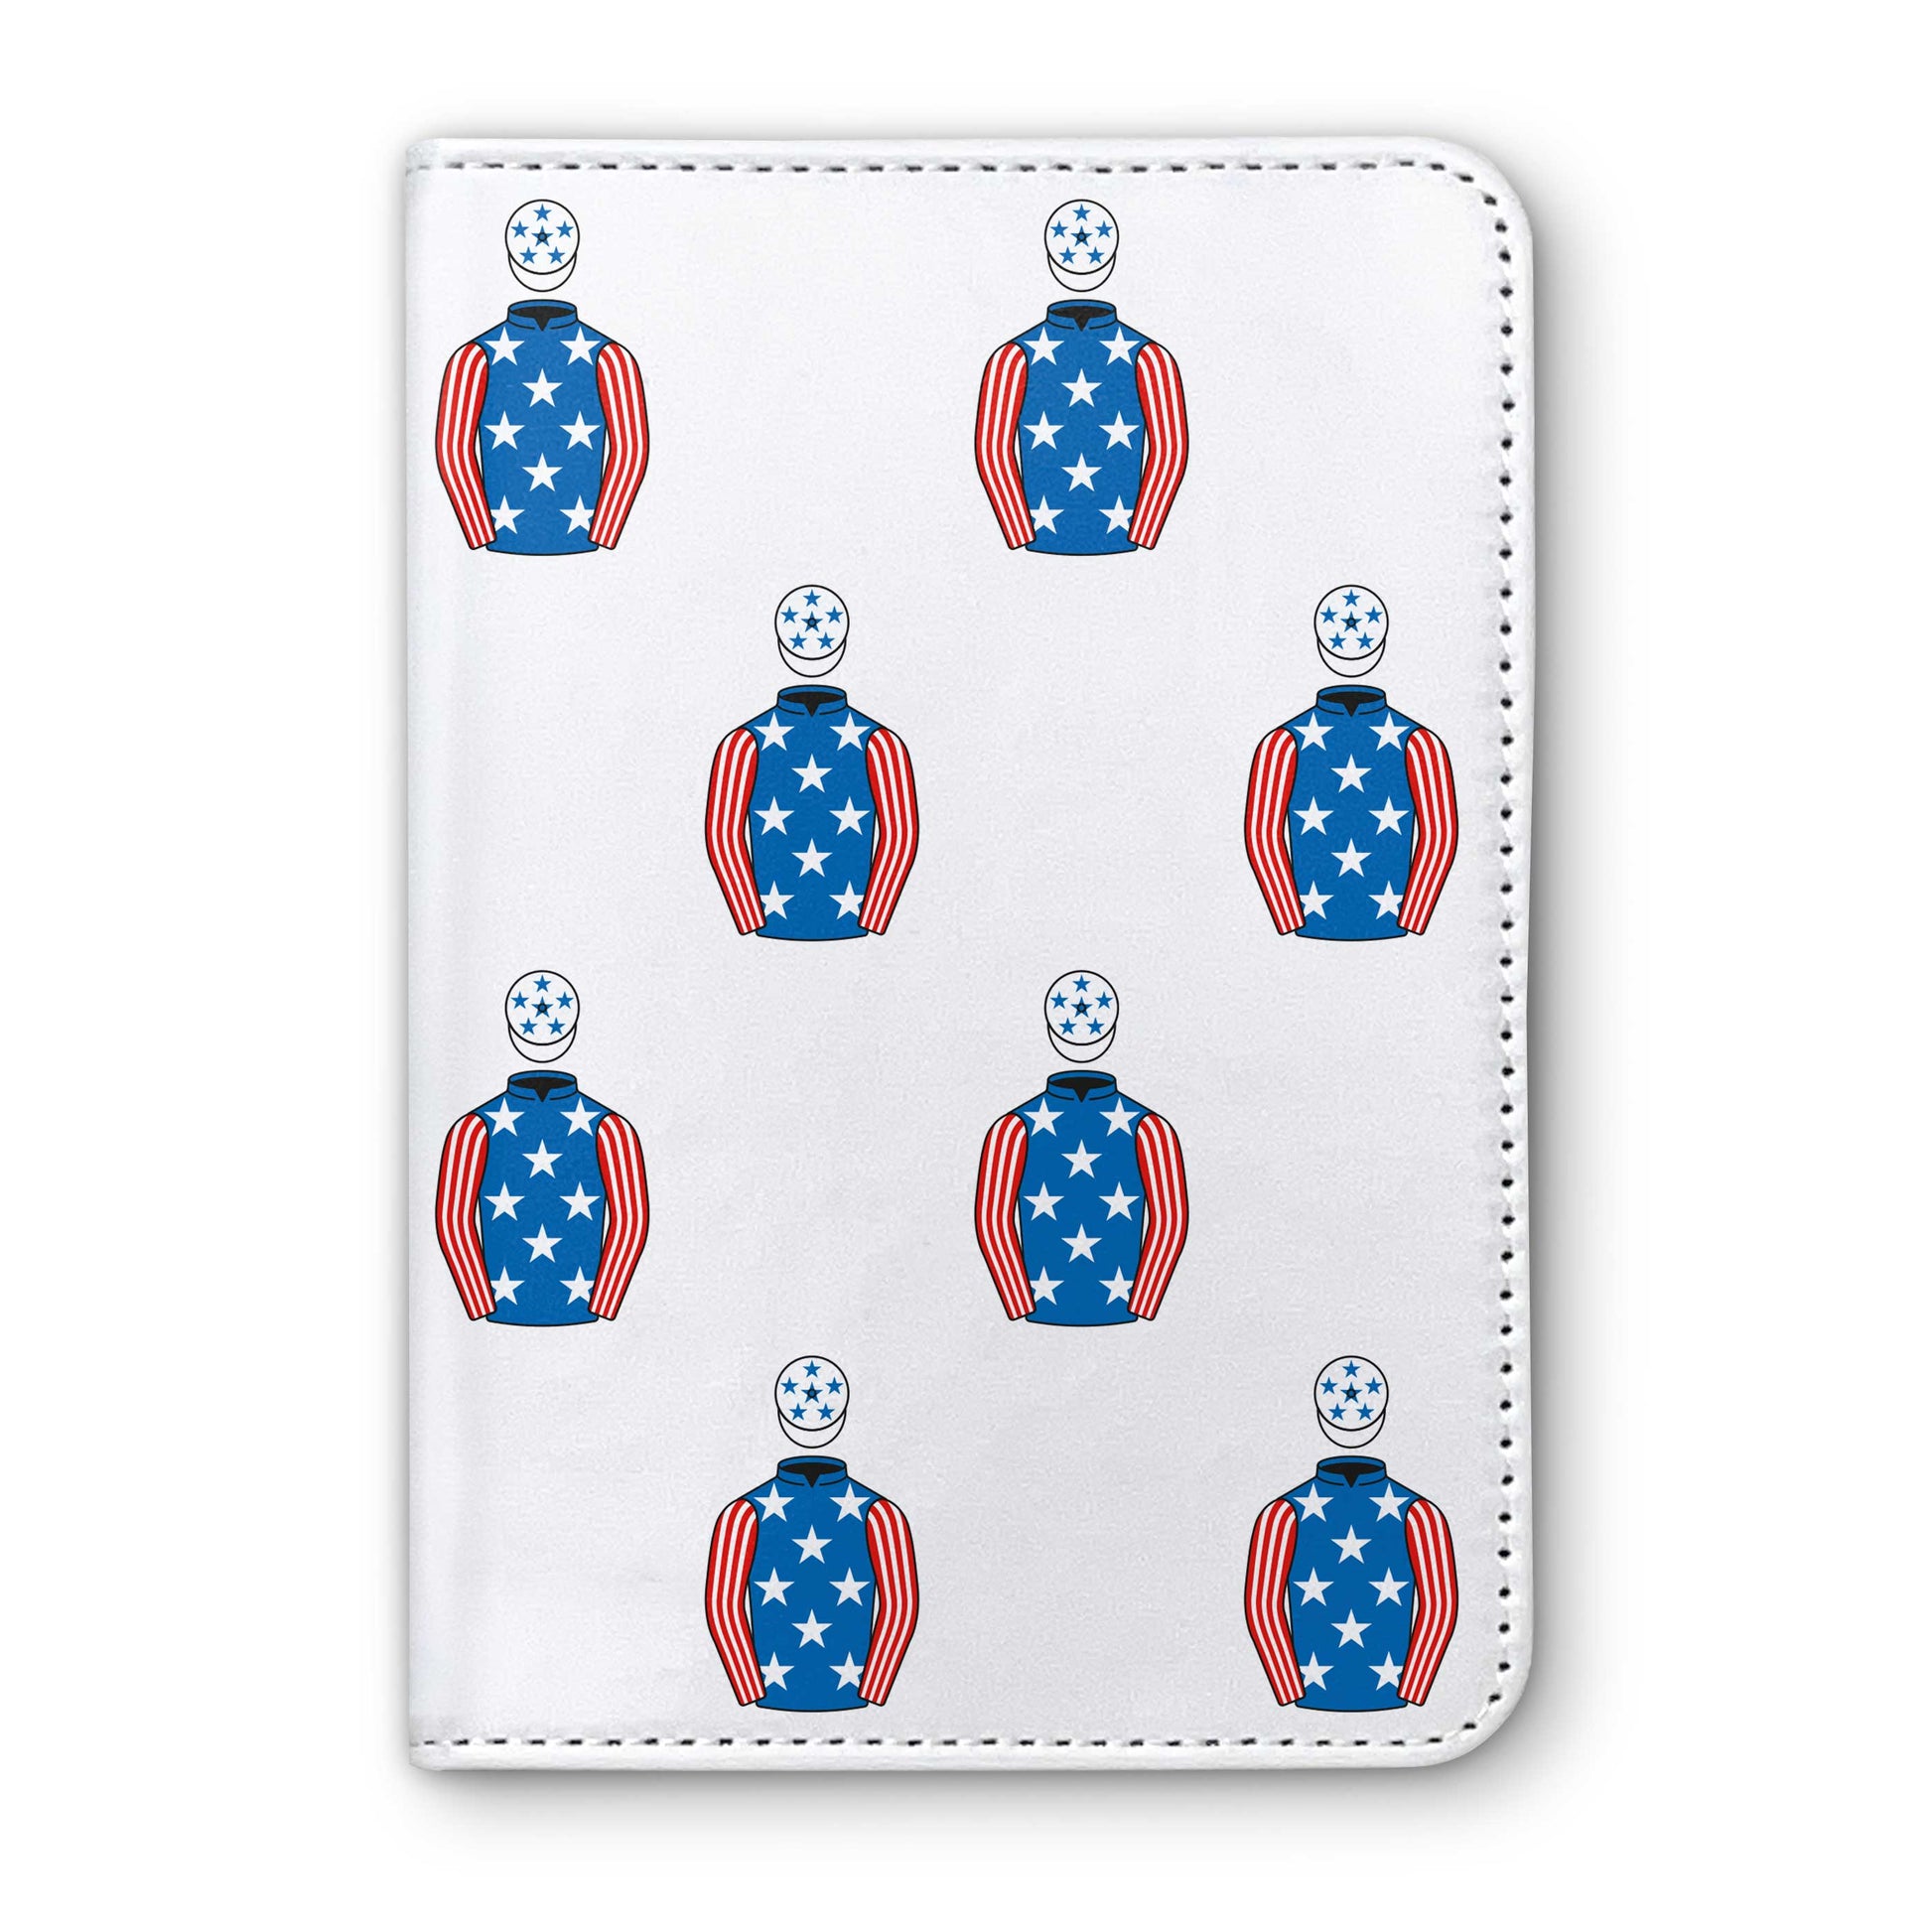 Mrs S Rowley-Williams Horse Racing Passport Holder - Hacked Up Horse Racing Gifts